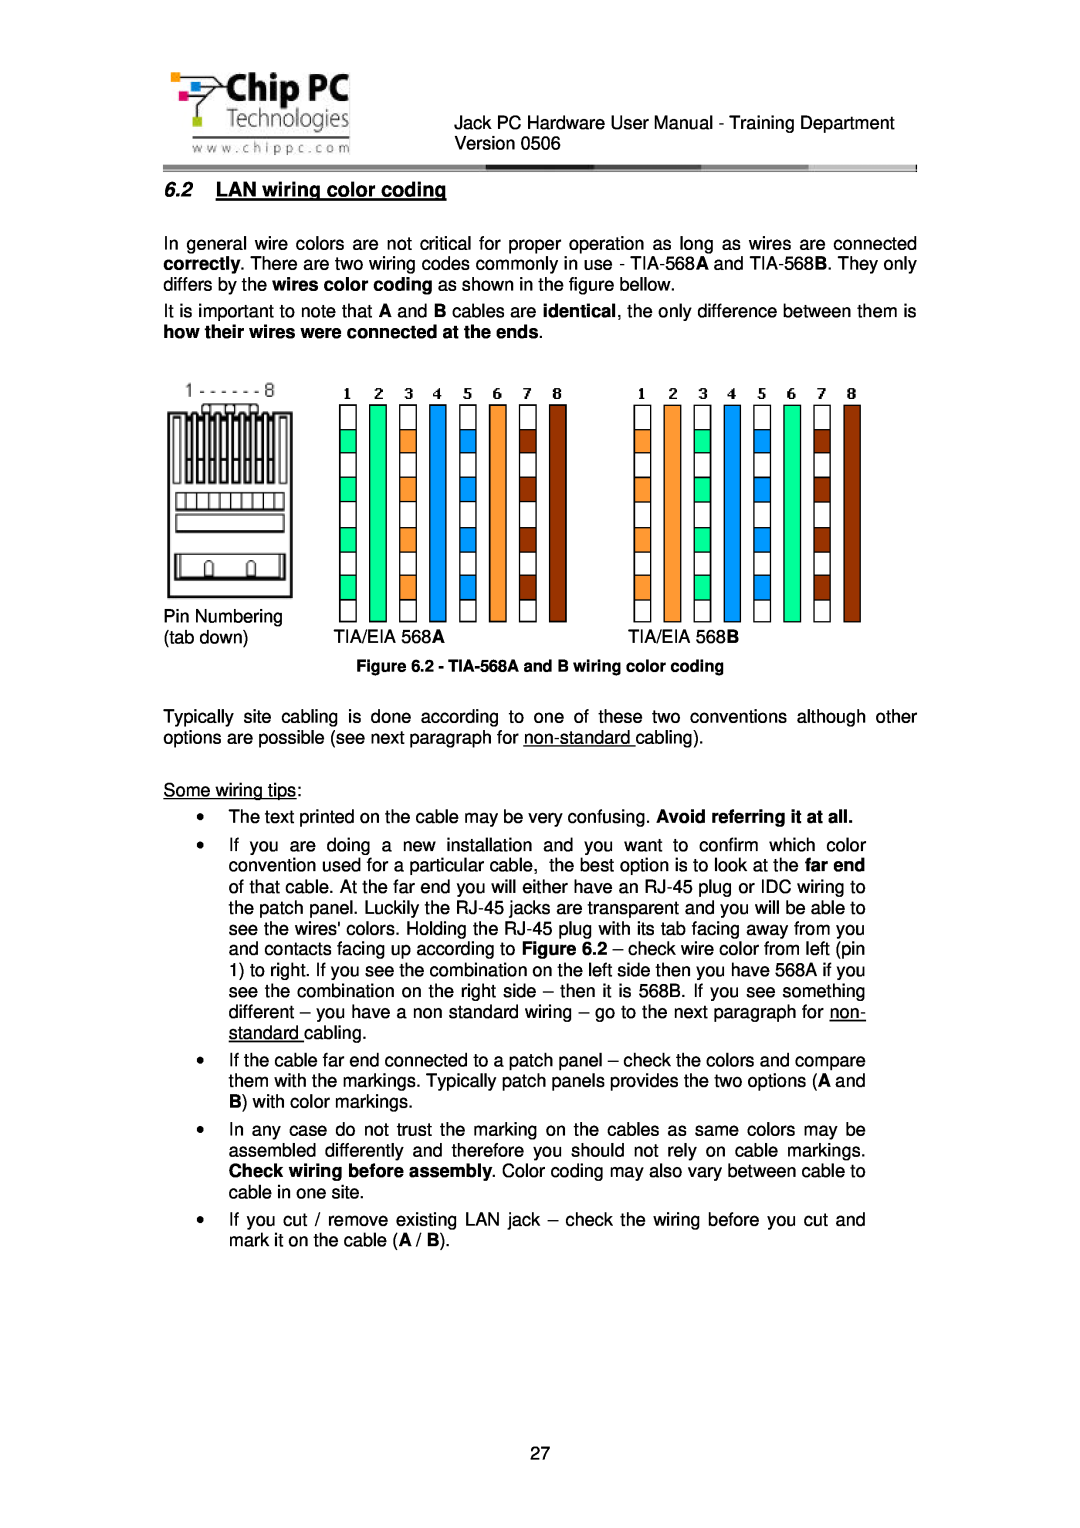 Chip PC CDC01927 manual LAN wiring color coding, 2 - TIA-568A and B wiring color coding 